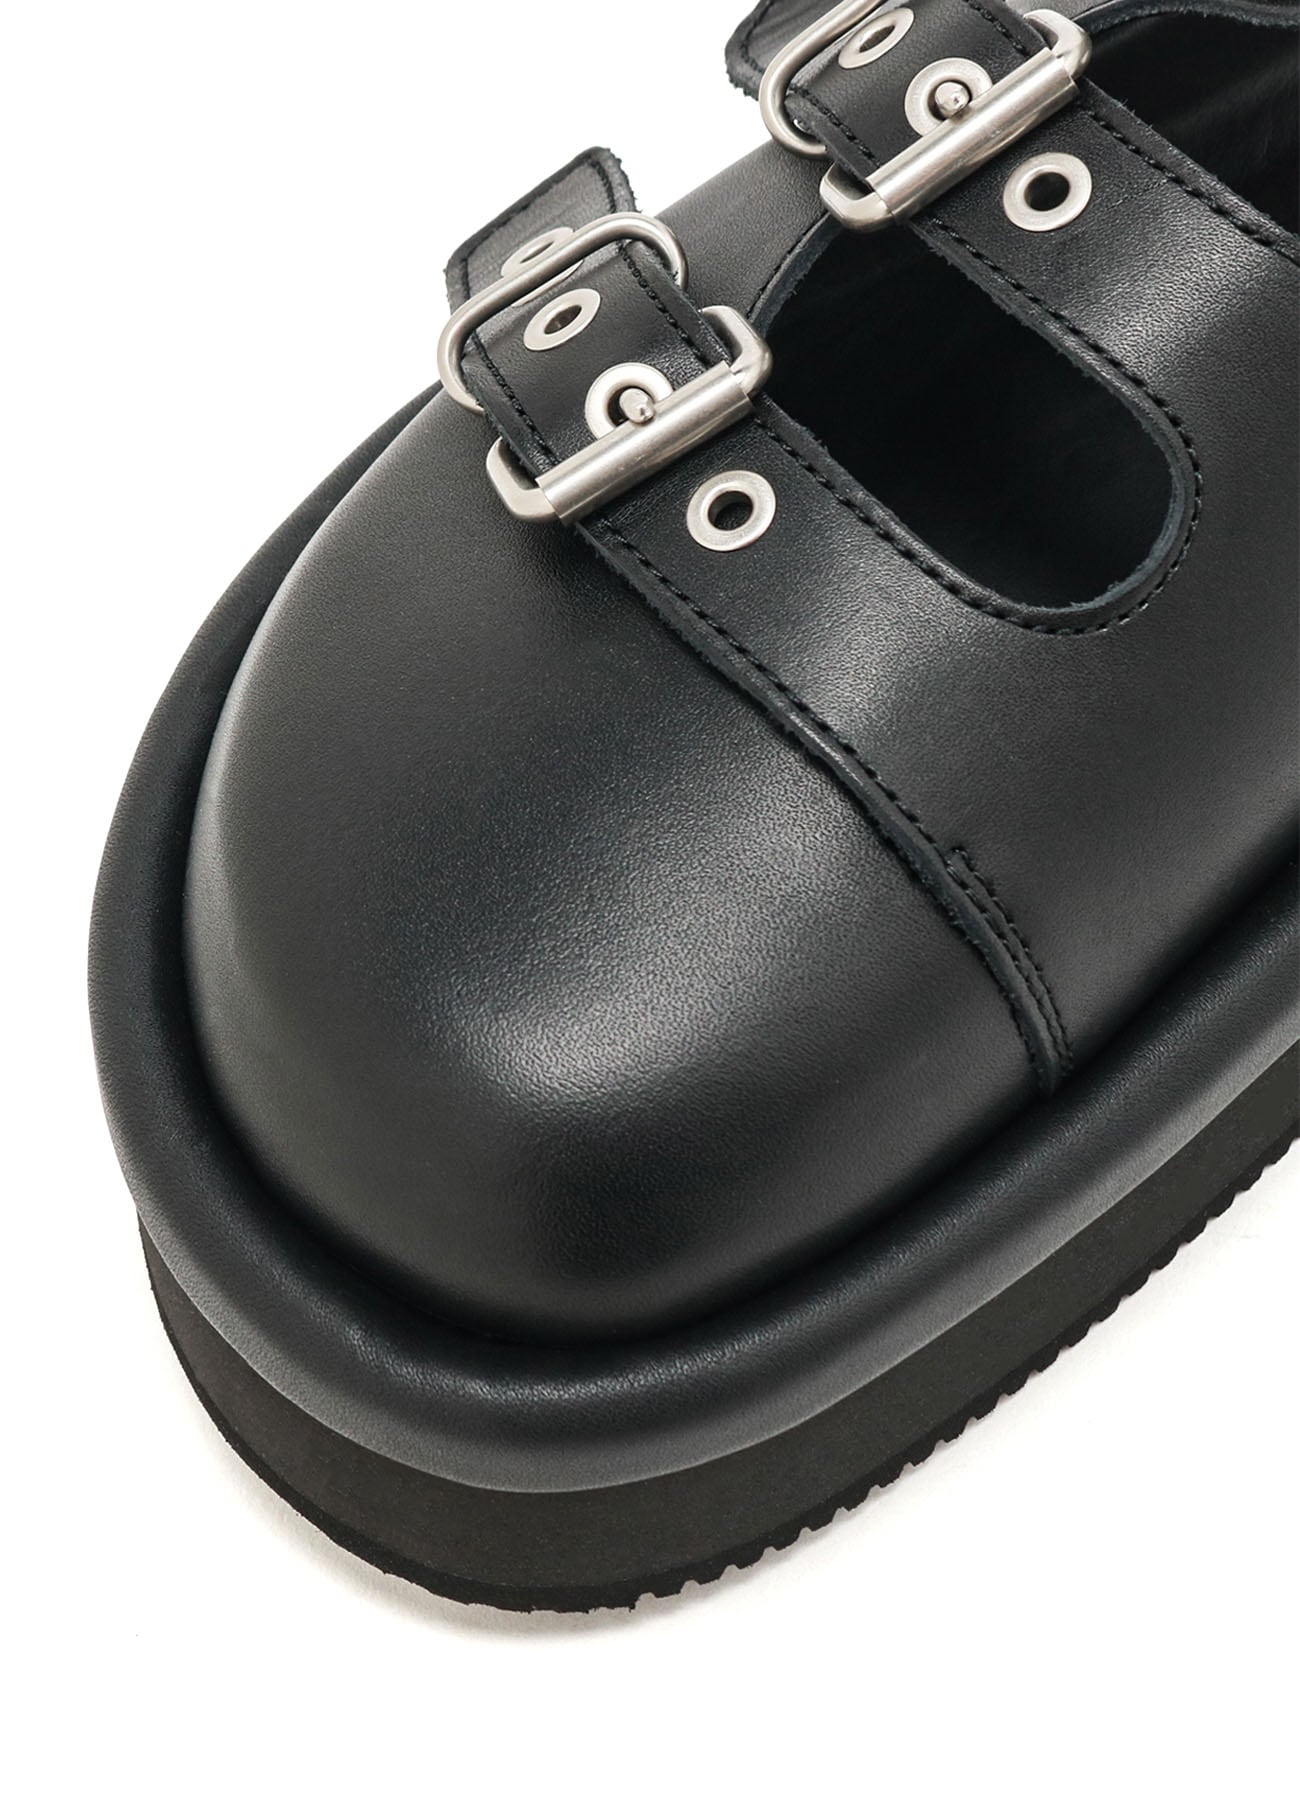 【7/17 12:00(JST) Release】COW LEATHER SANDAL